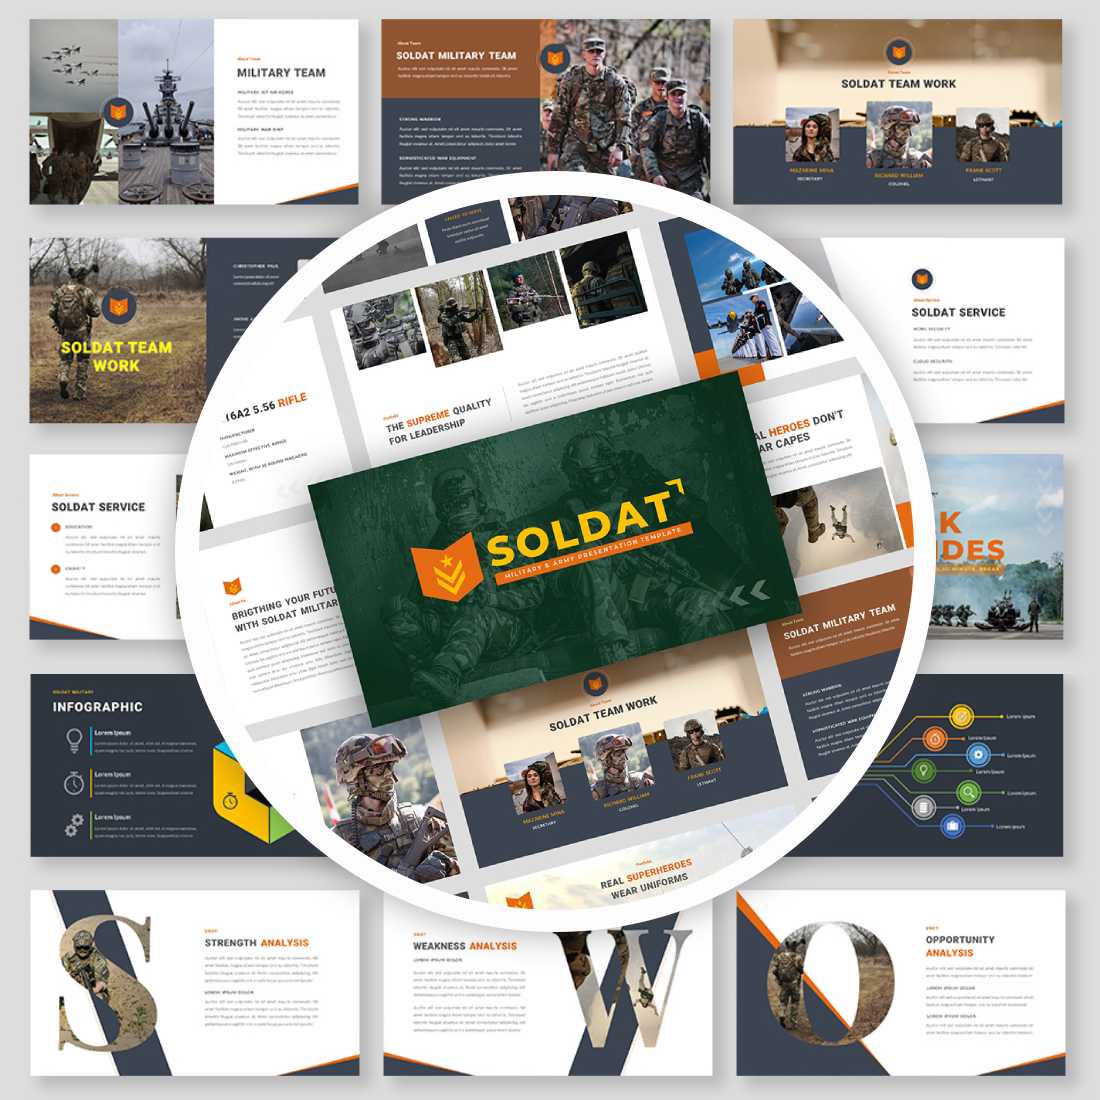 SOLDAT - Military & Army Presentation PowerPoint Template cover image.